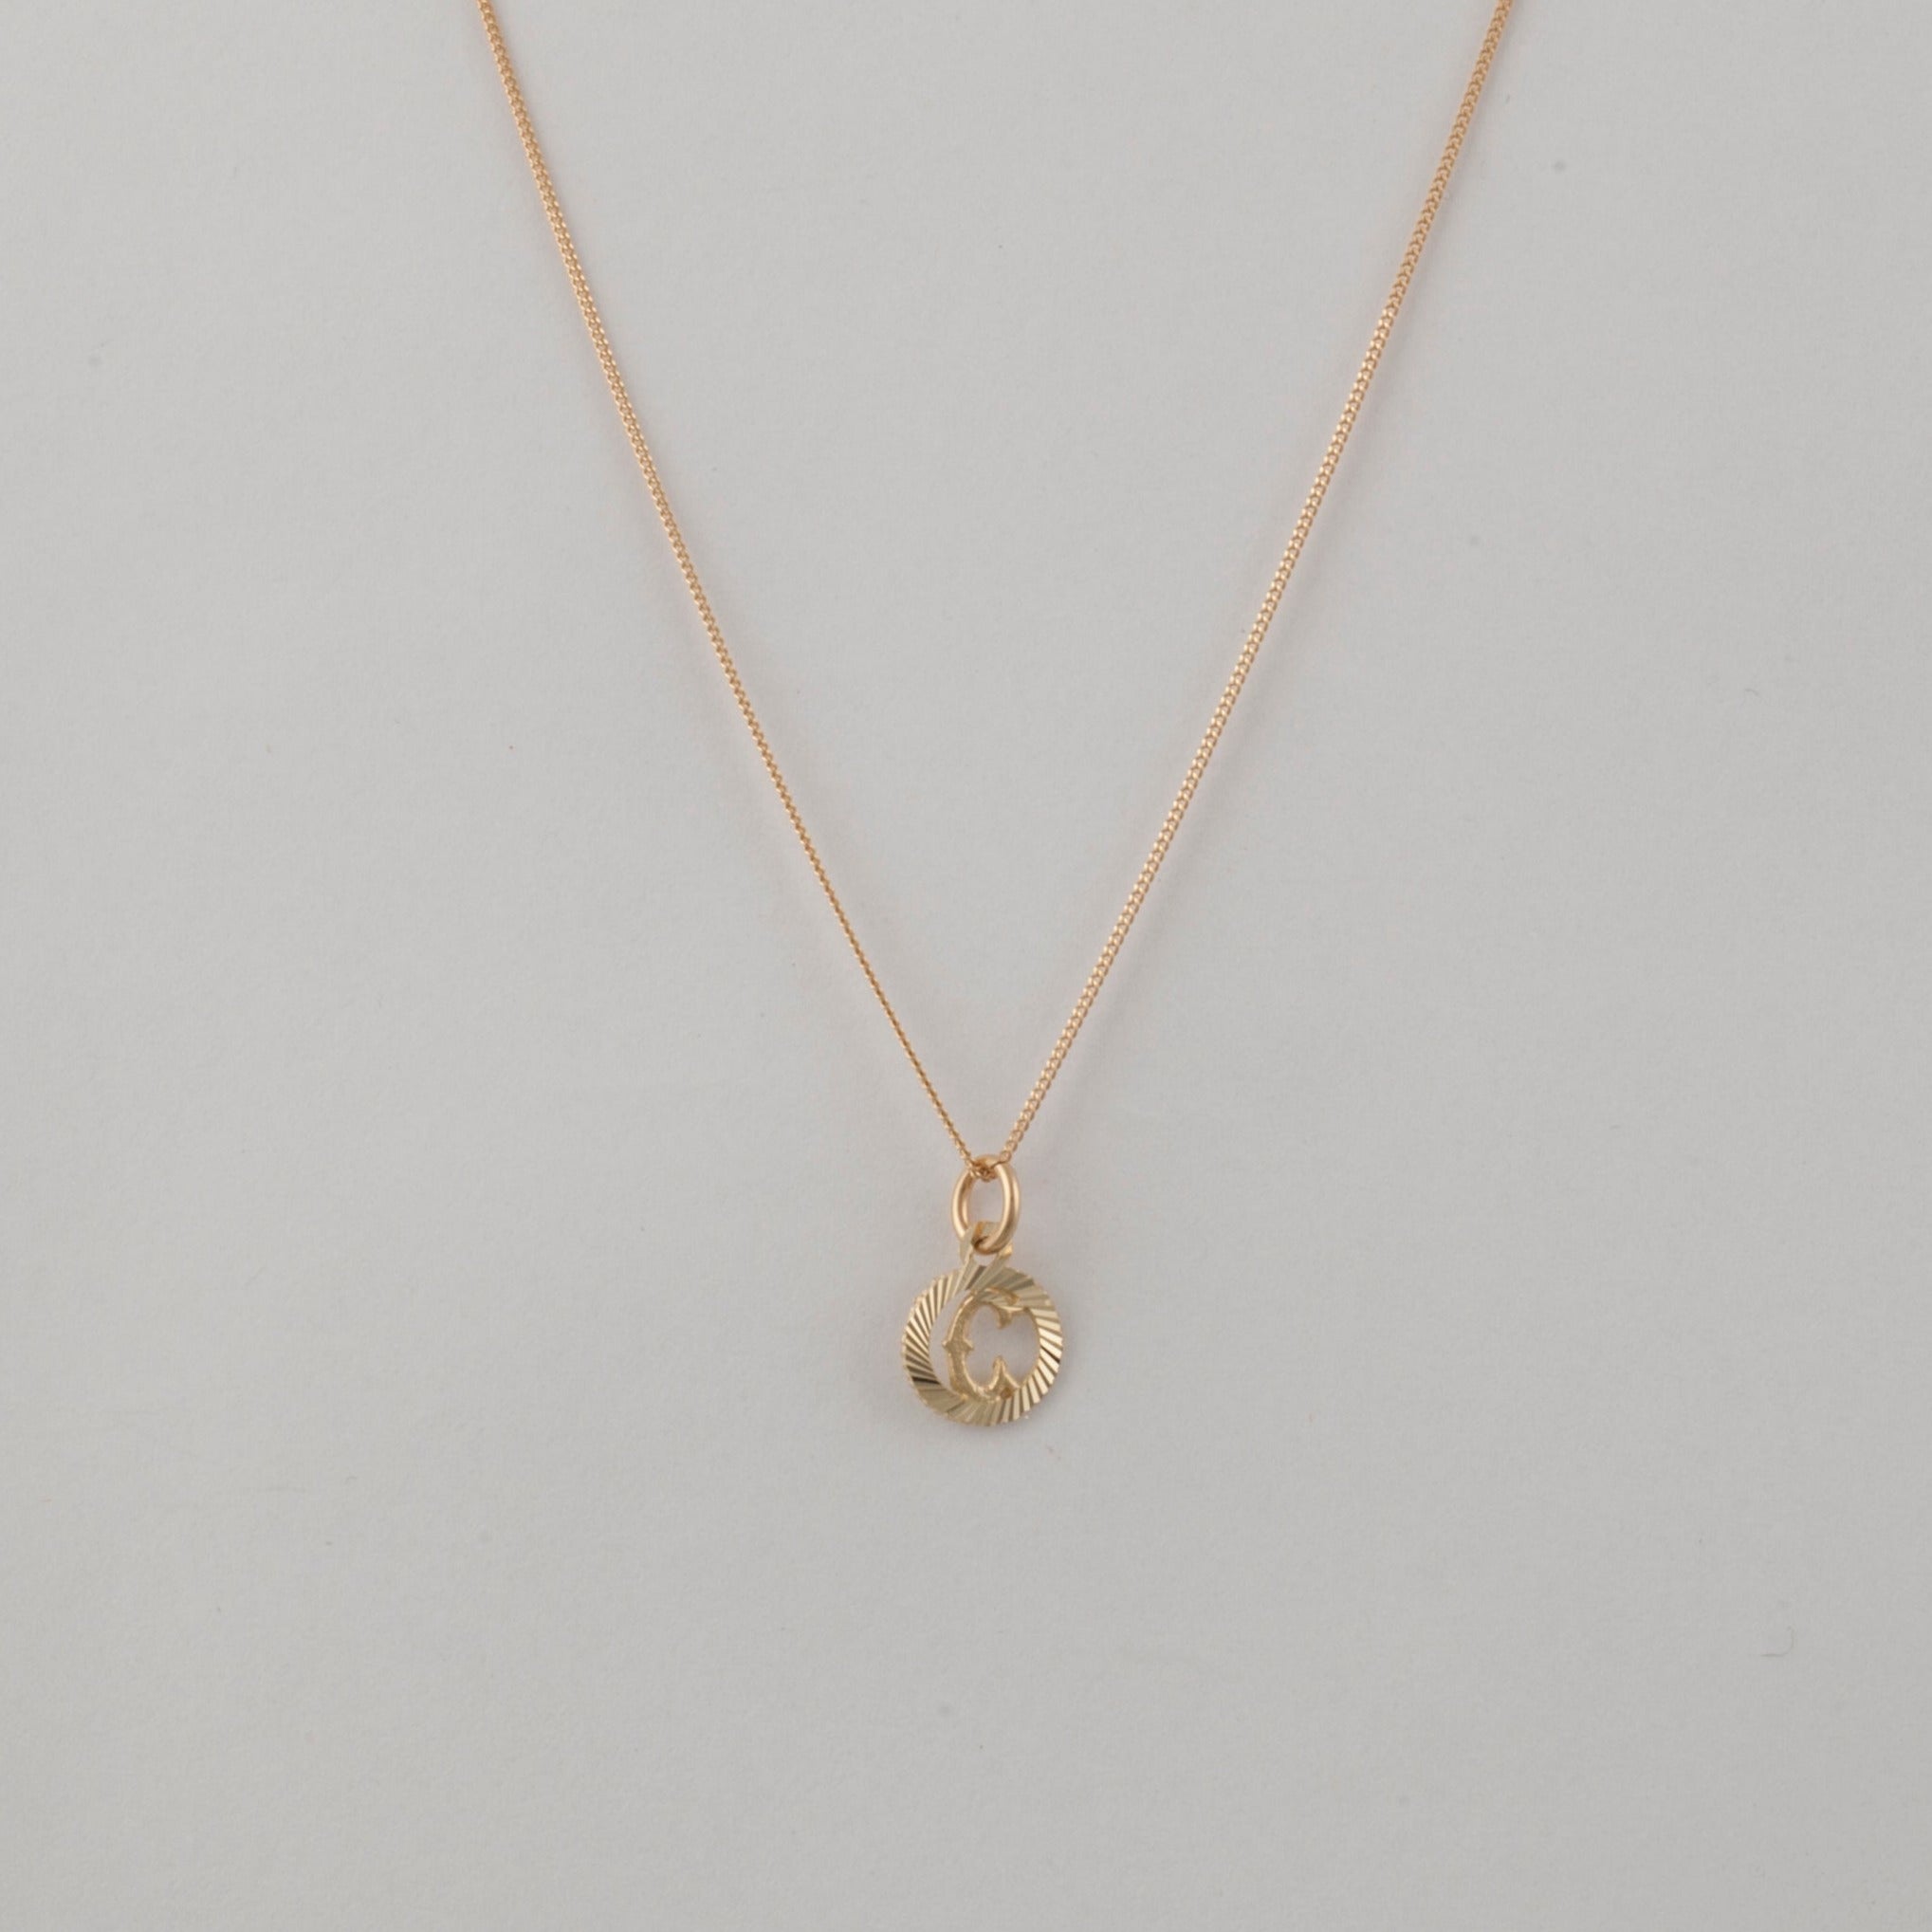 10k gold Small Initial Pendant in Circle Charm on a thin curb chain